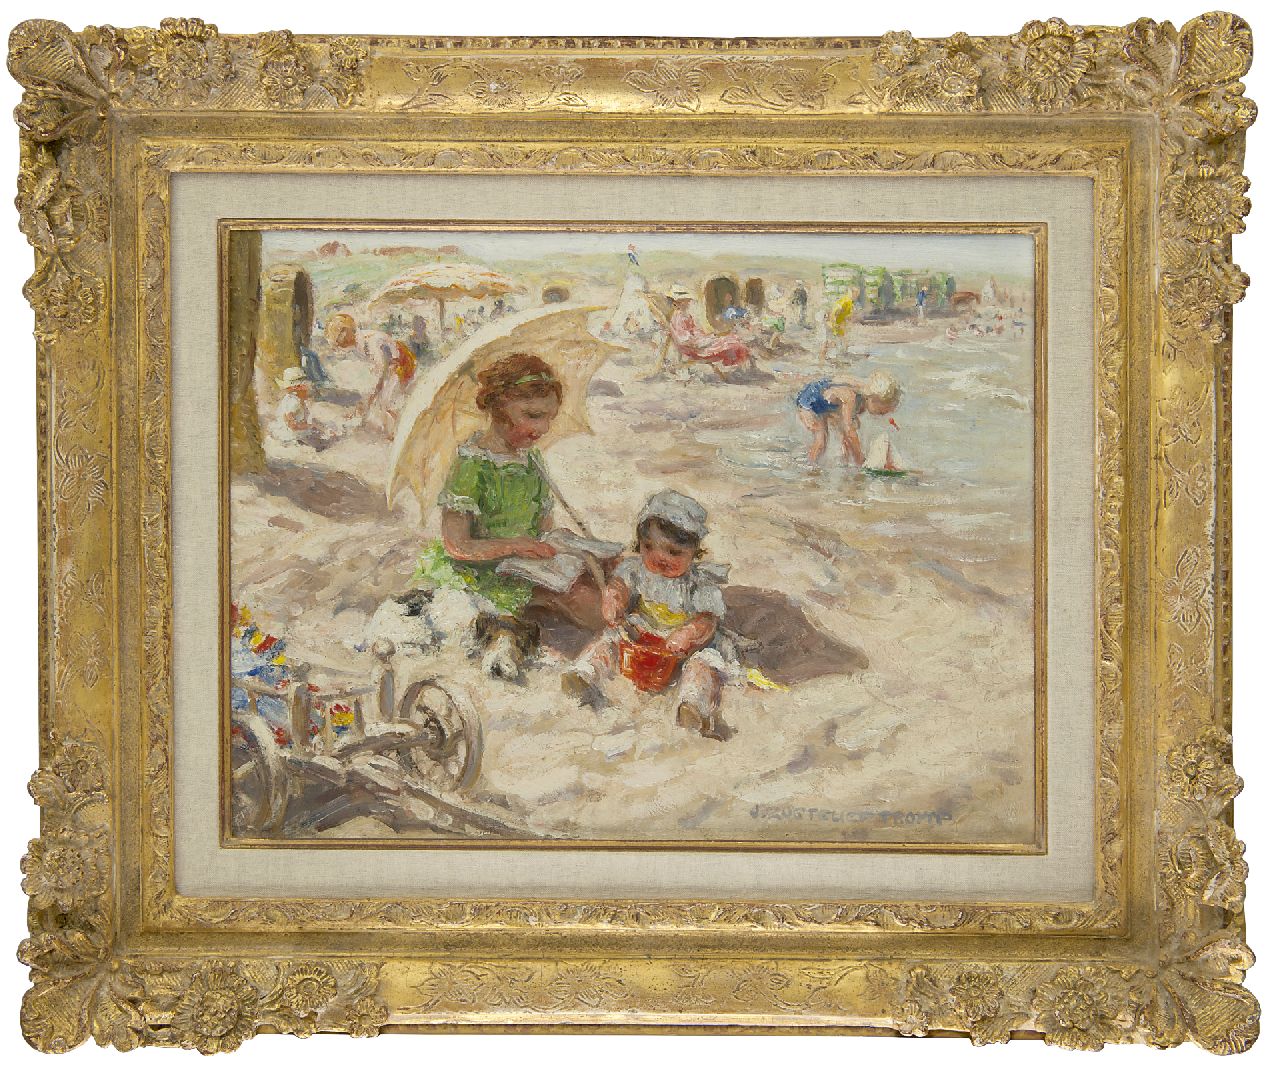 Zoetelief Tromp J.  | Johannes 'Jan' Zoetelief Tromp | Paintings offered for sale | A day at the beach, oil on canvas 30.0 x 40.0 cm, signed l.r. and on the reverse